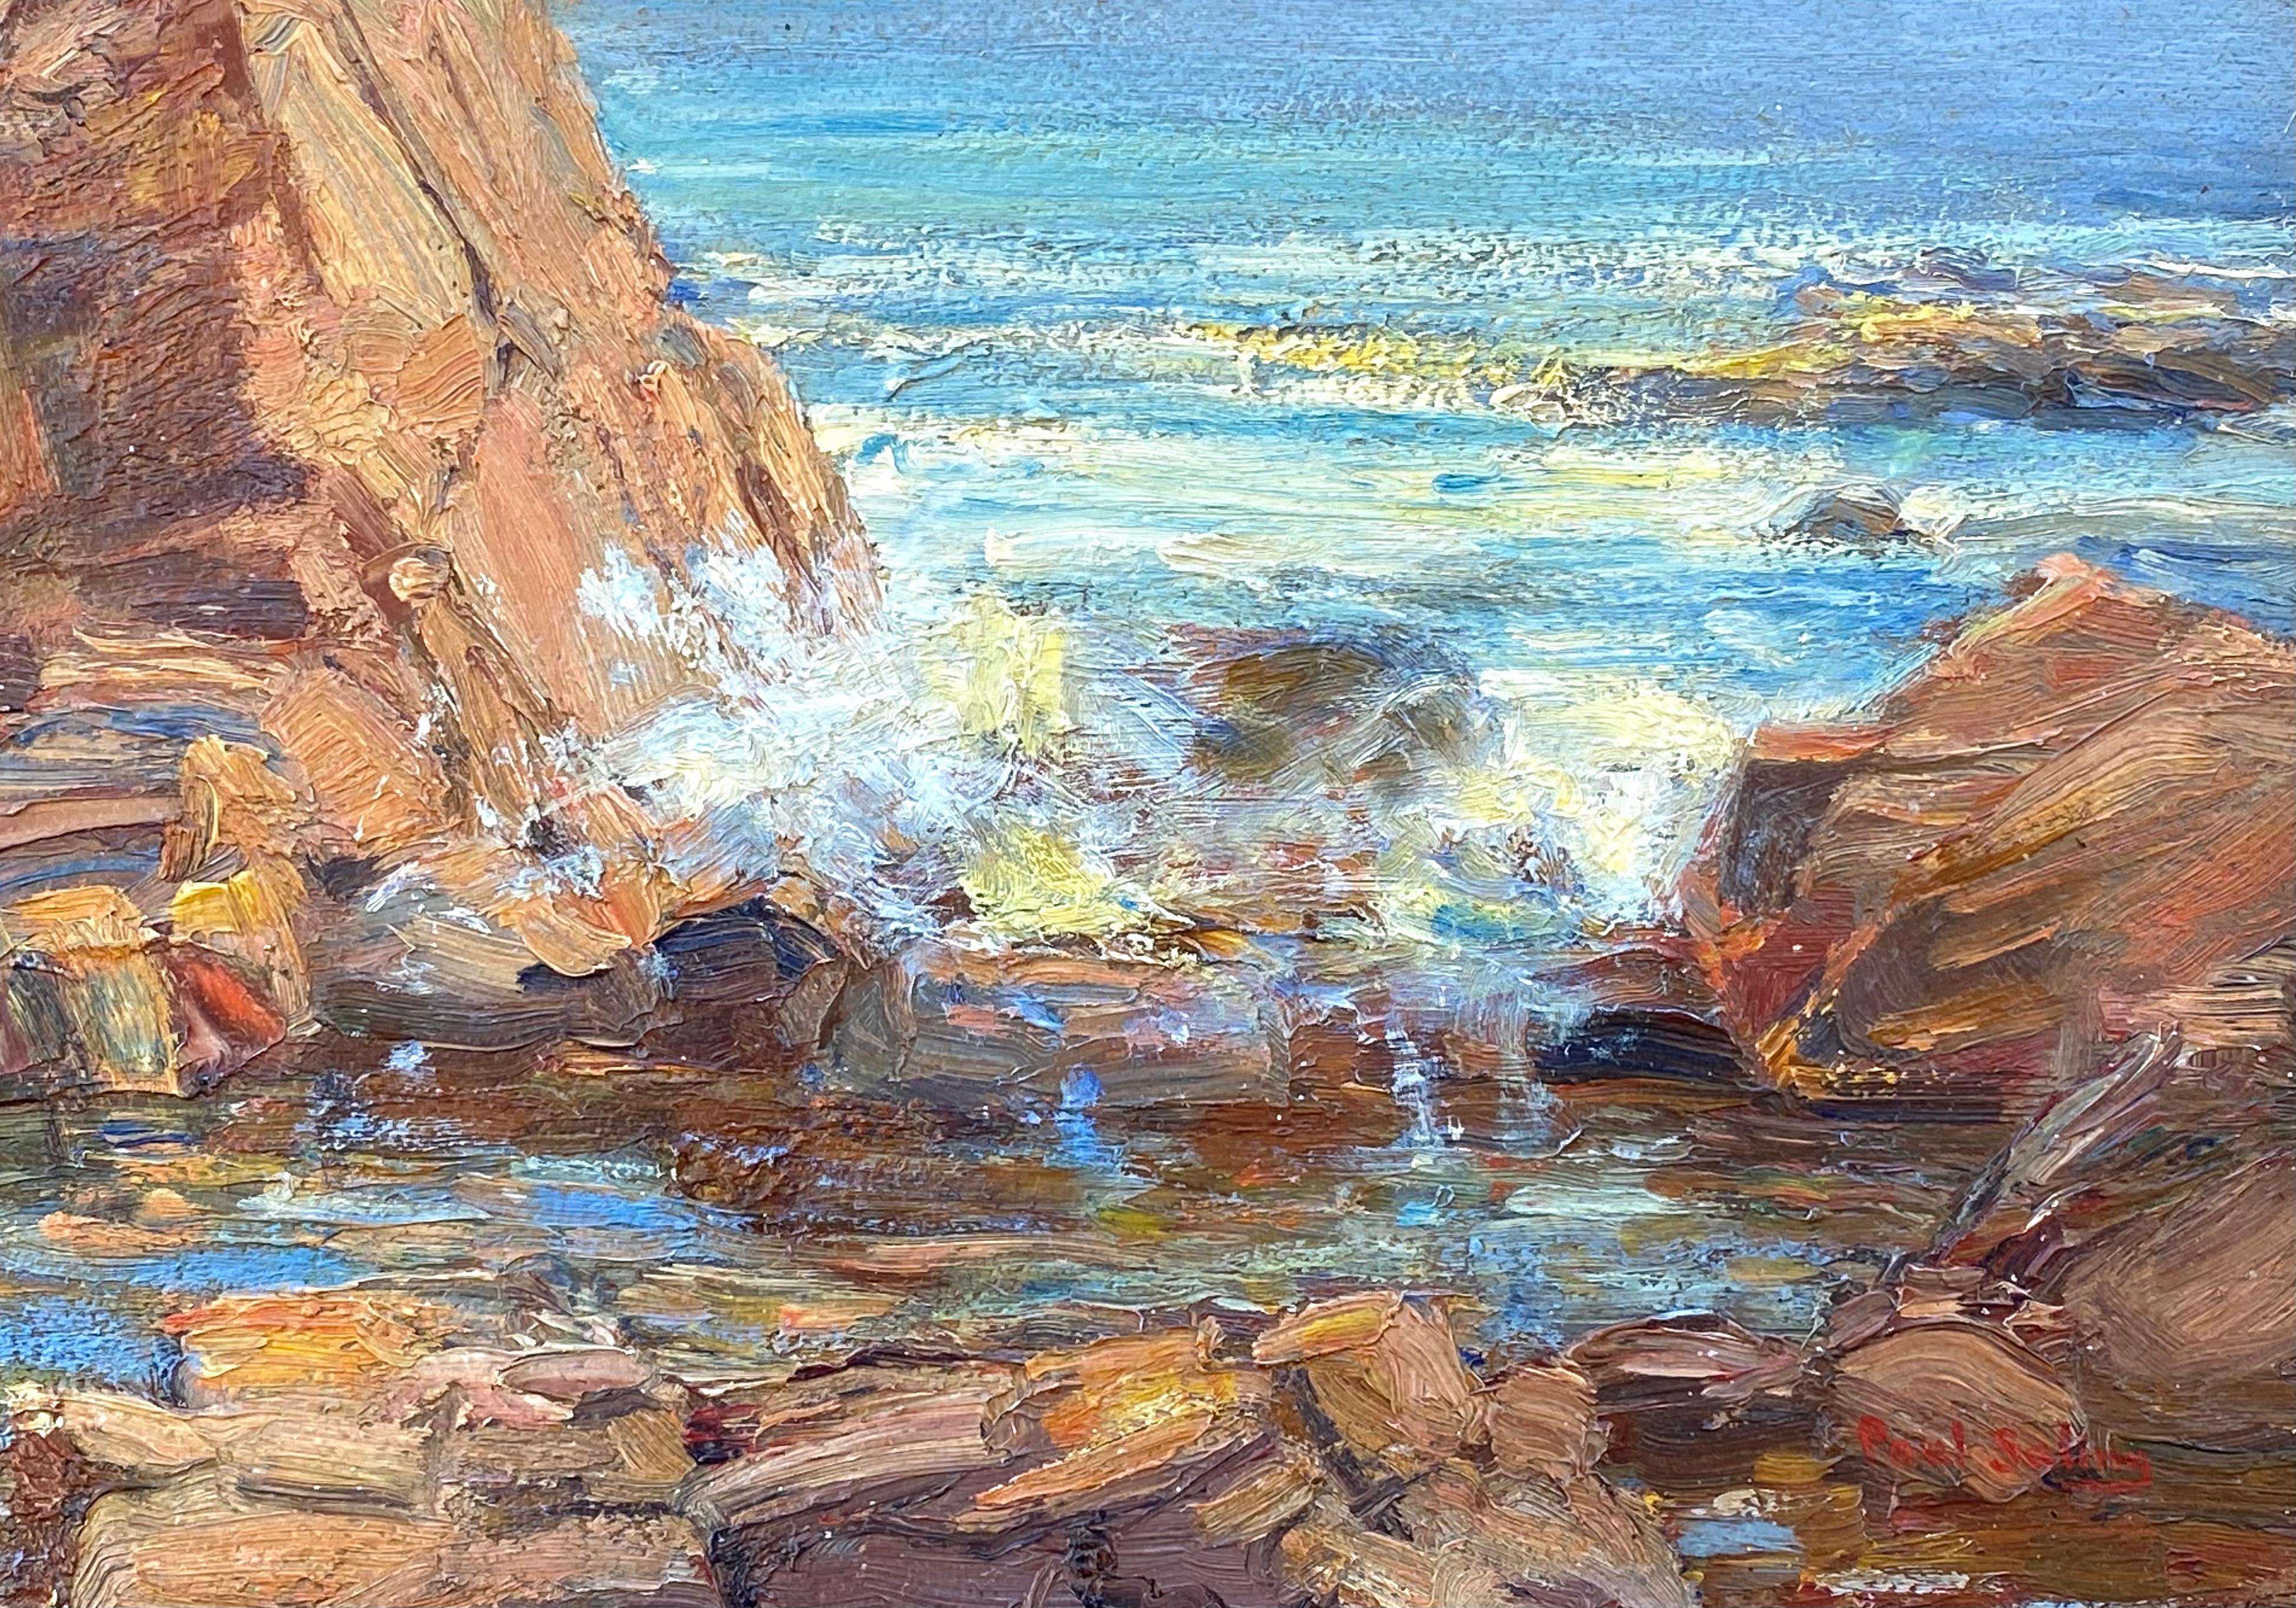 “Sailing off the Rocky Coast” - Post-Impressionist Painting by Paul E. Saling